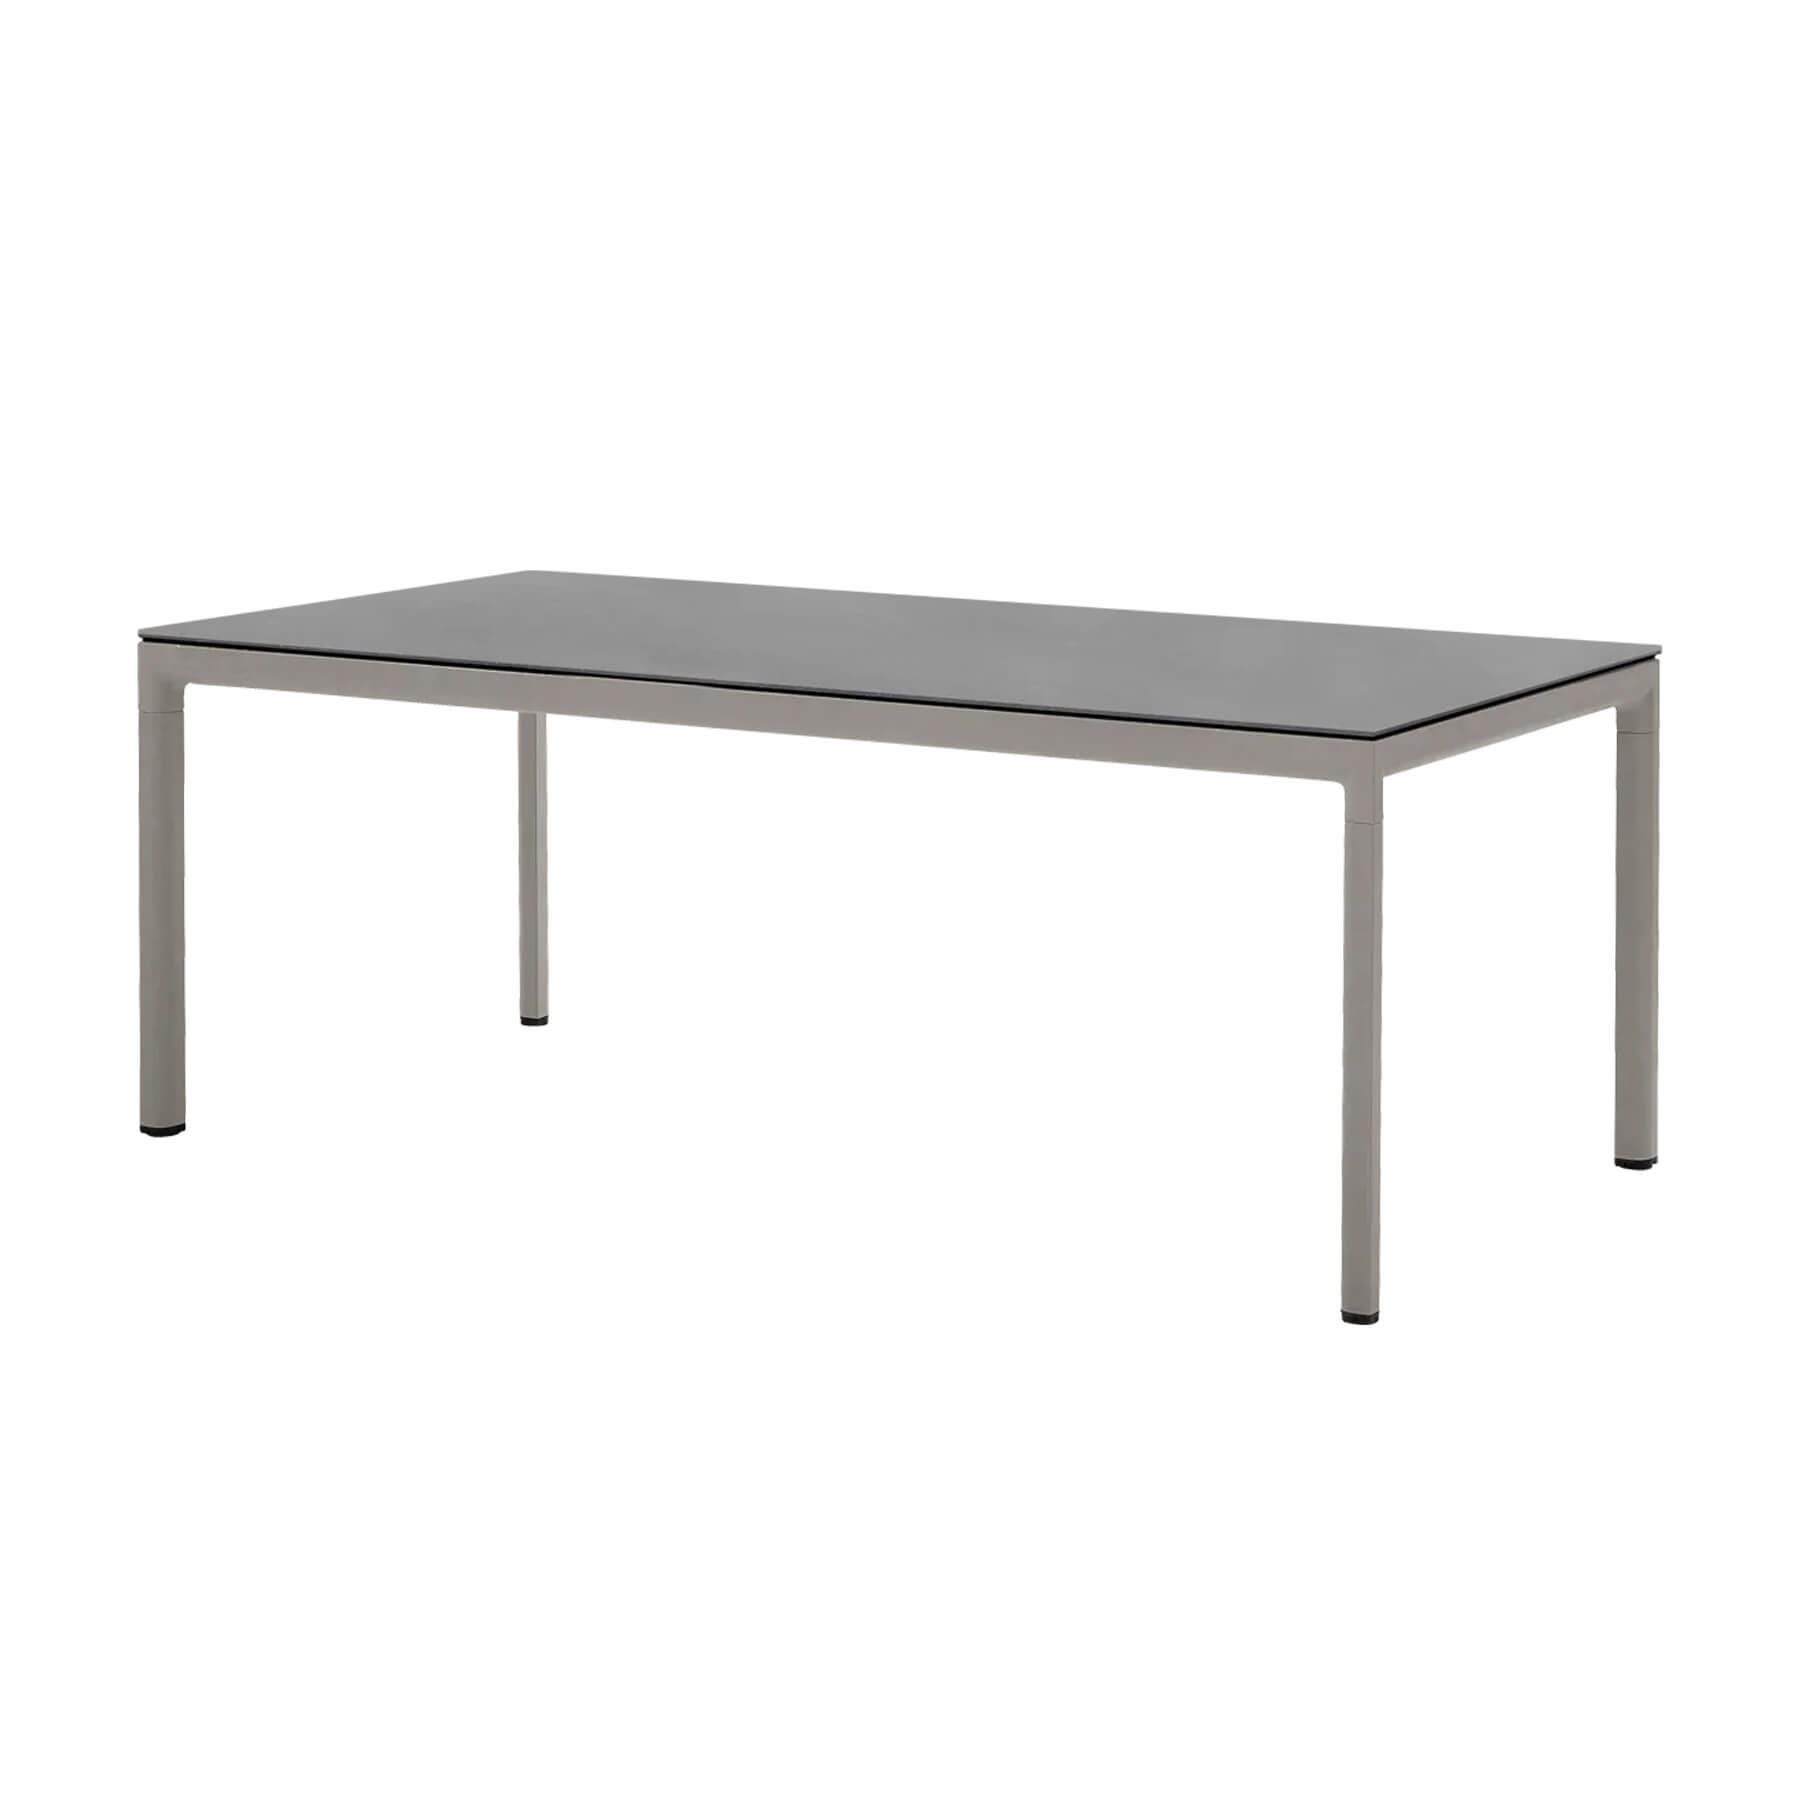 Caneline Drop Outdoor Dining Table Ceramic Basalt Top Taupe Legs Grey